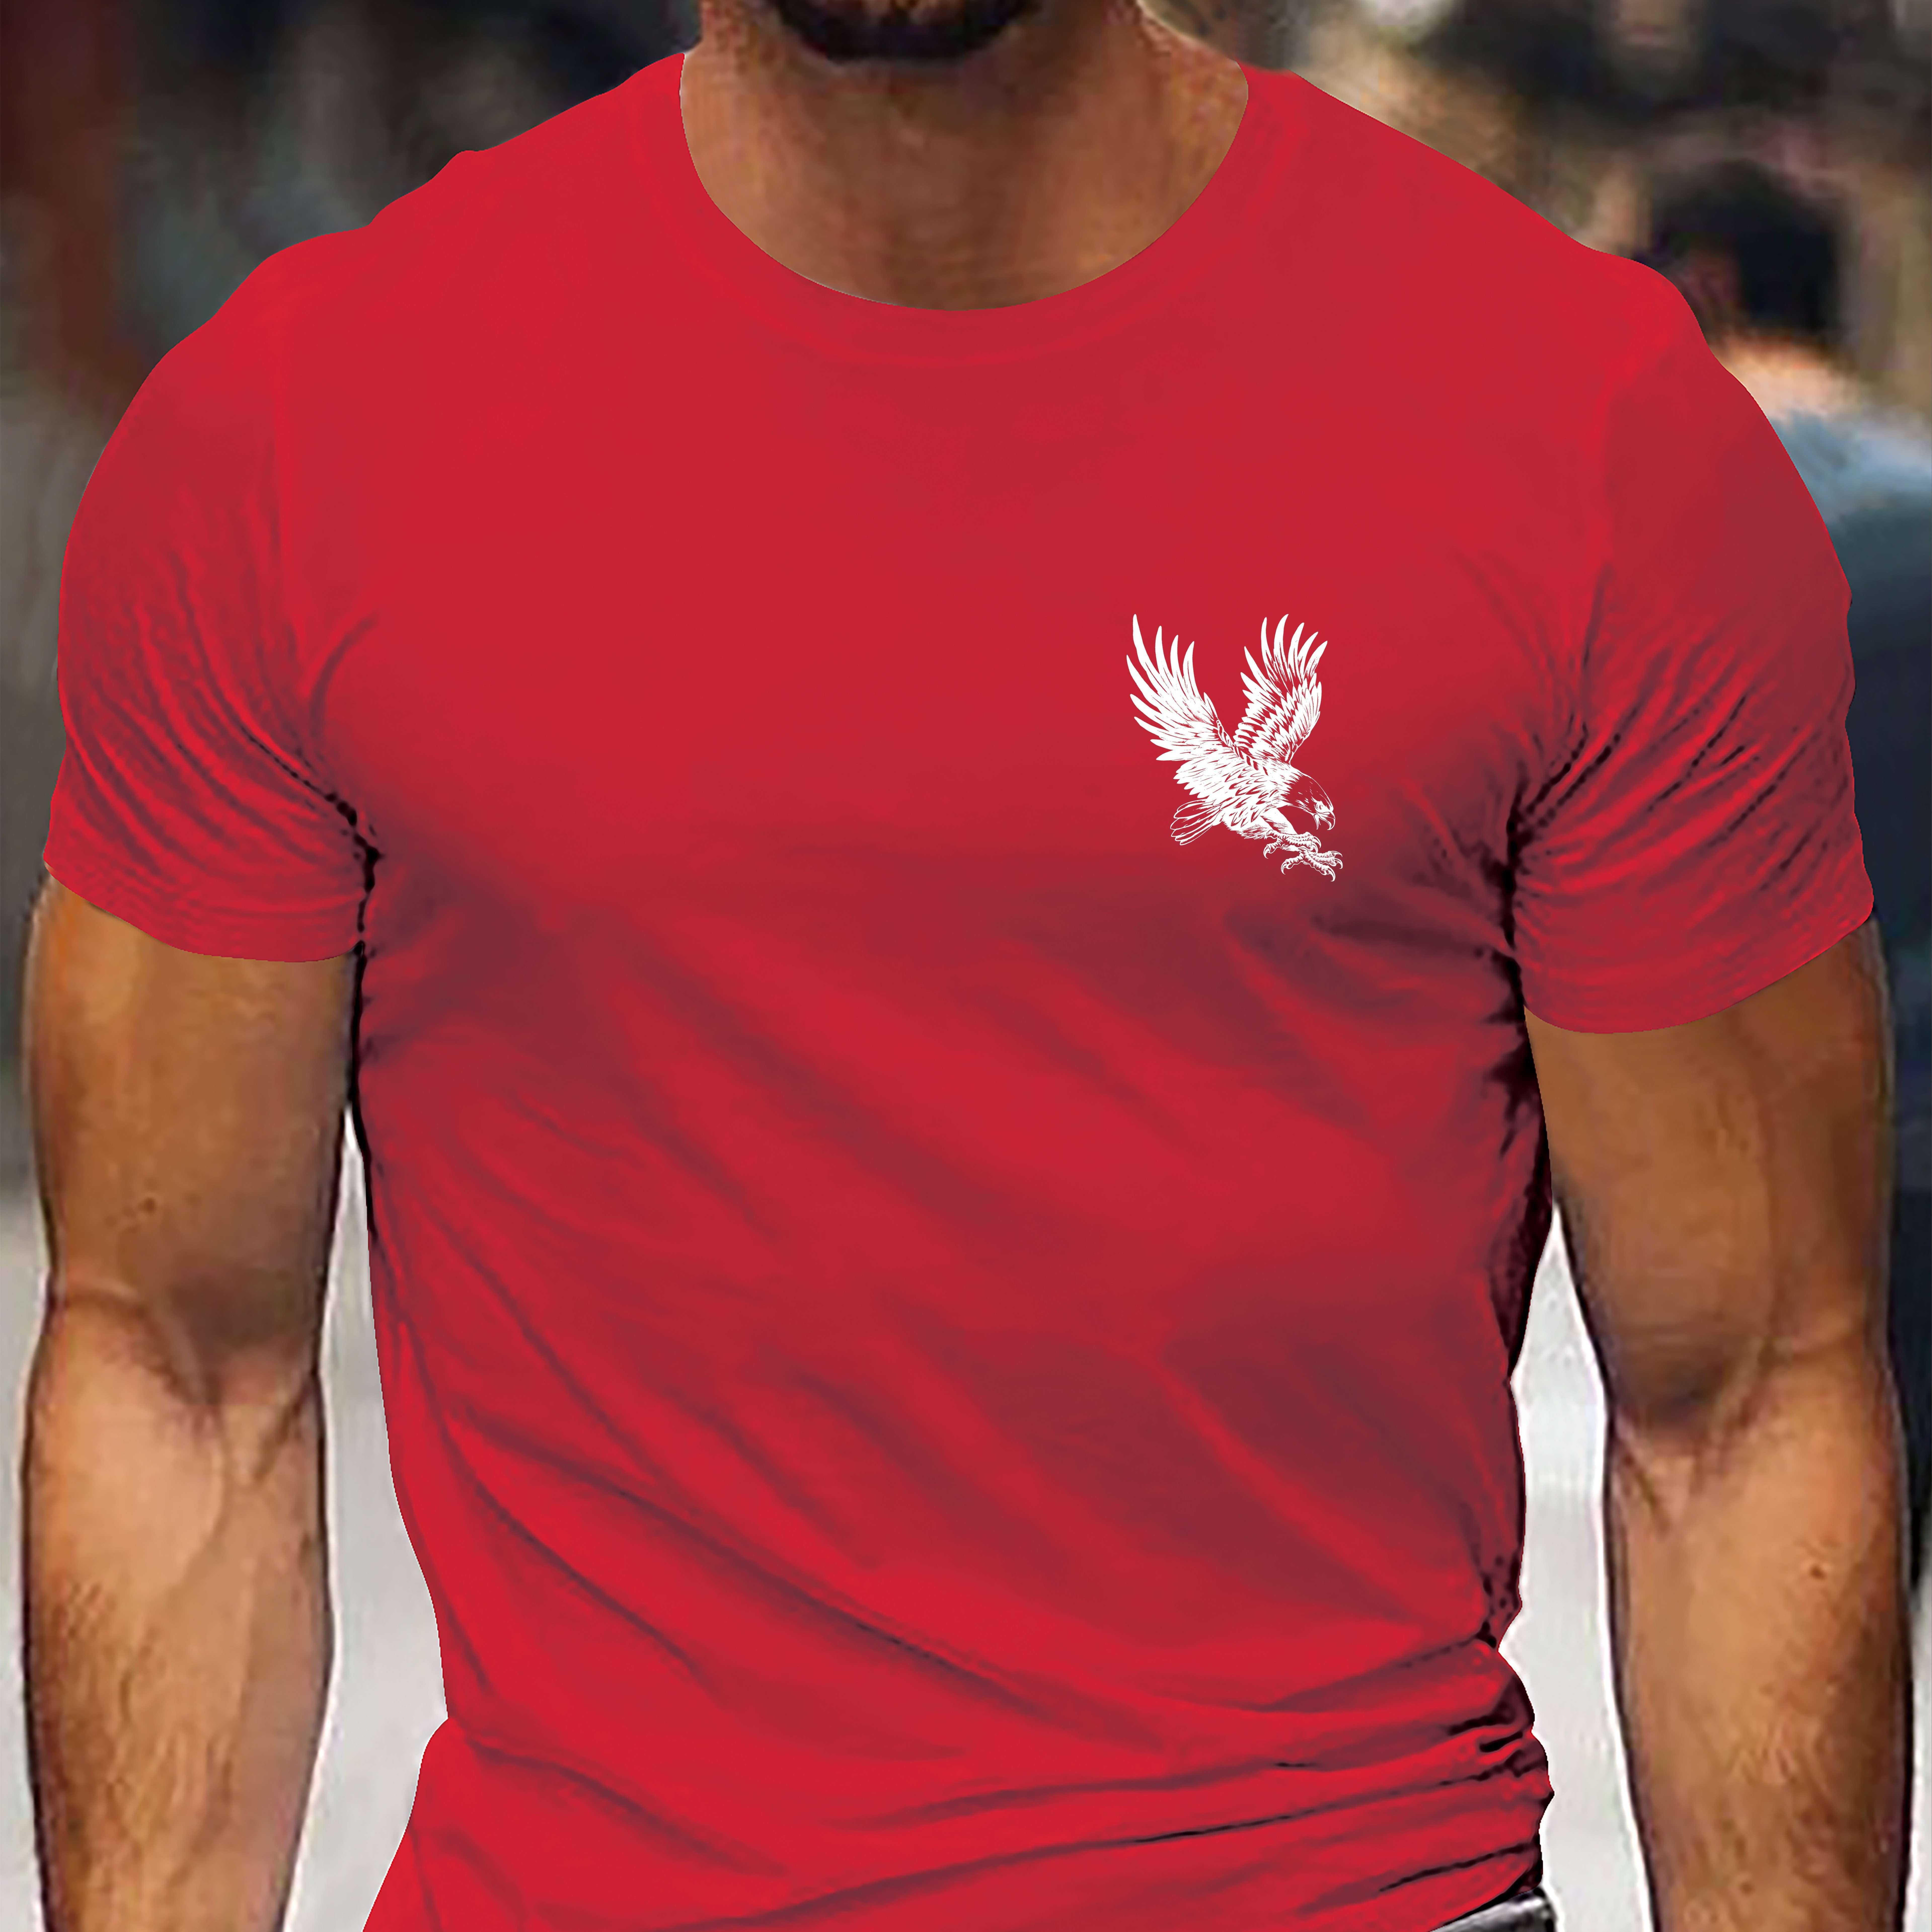 

Eagle Graphic Men's Short Sleeve T-shirt, Comfy Stretchy Trendy Tees For Summer, Casual Daily Style Fashion Clothing